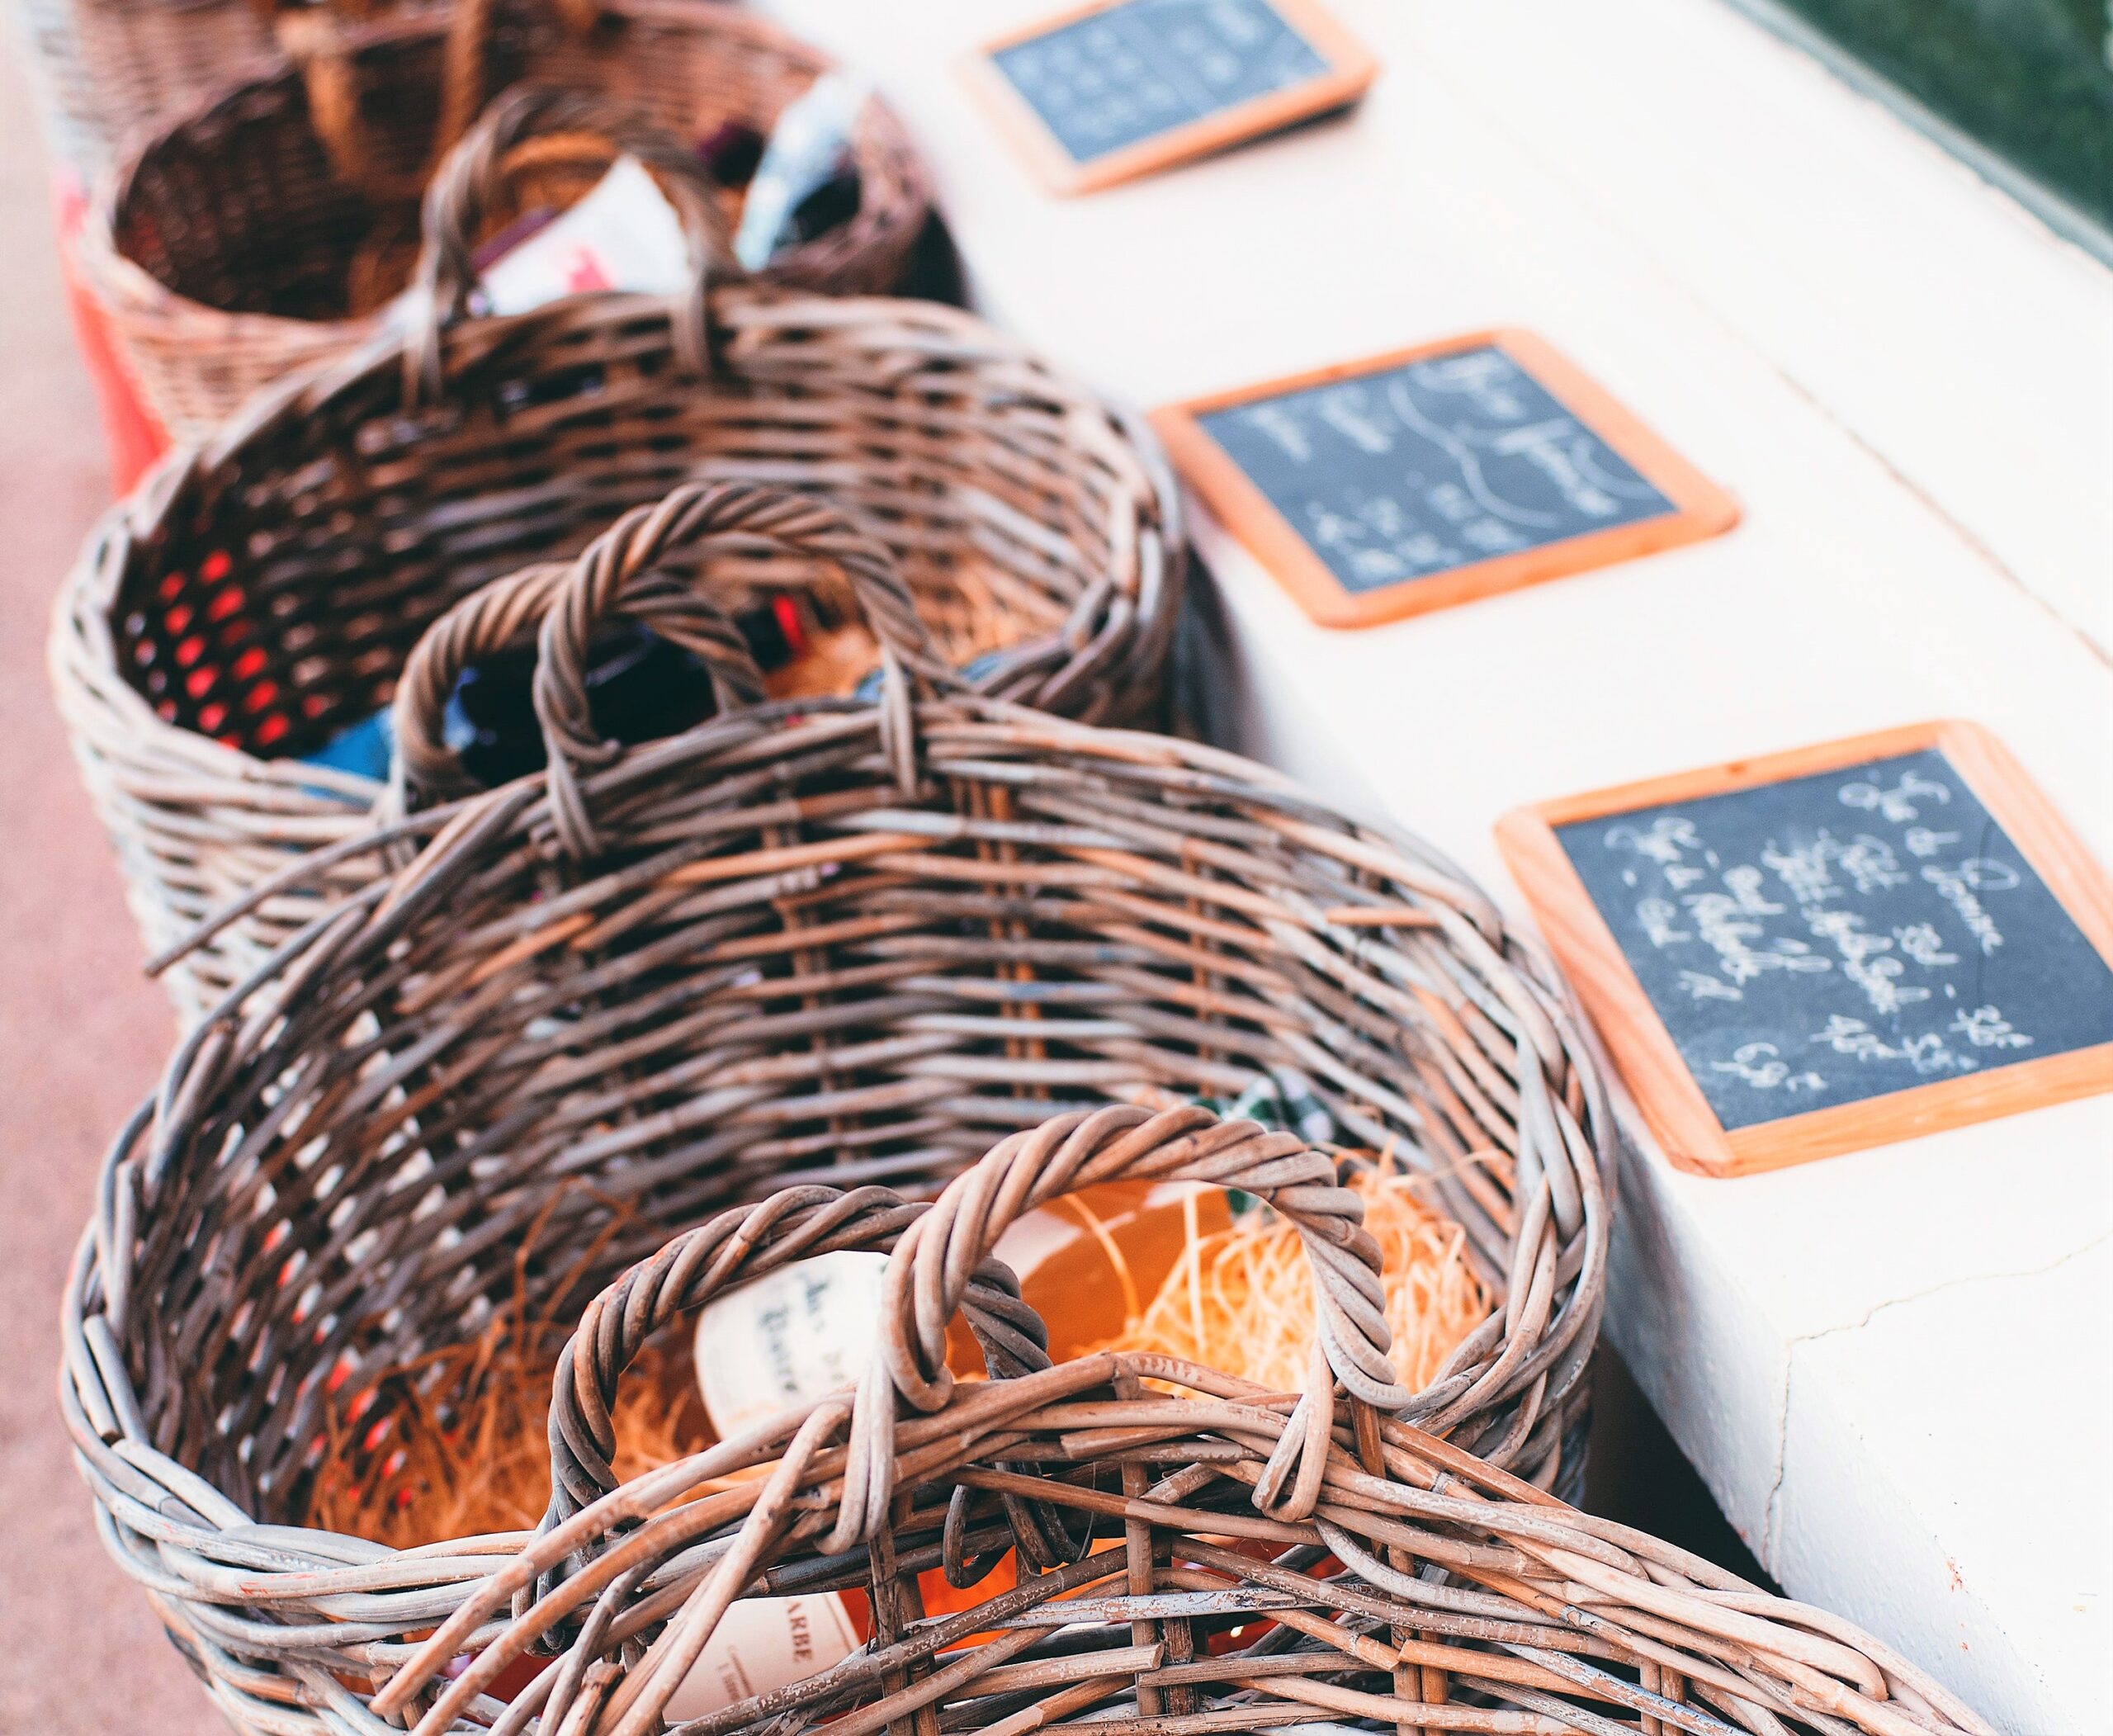 Wicker baskets are presented in front of a long white counter displaying old fashioned individual chalk boards with inscriptions on it.